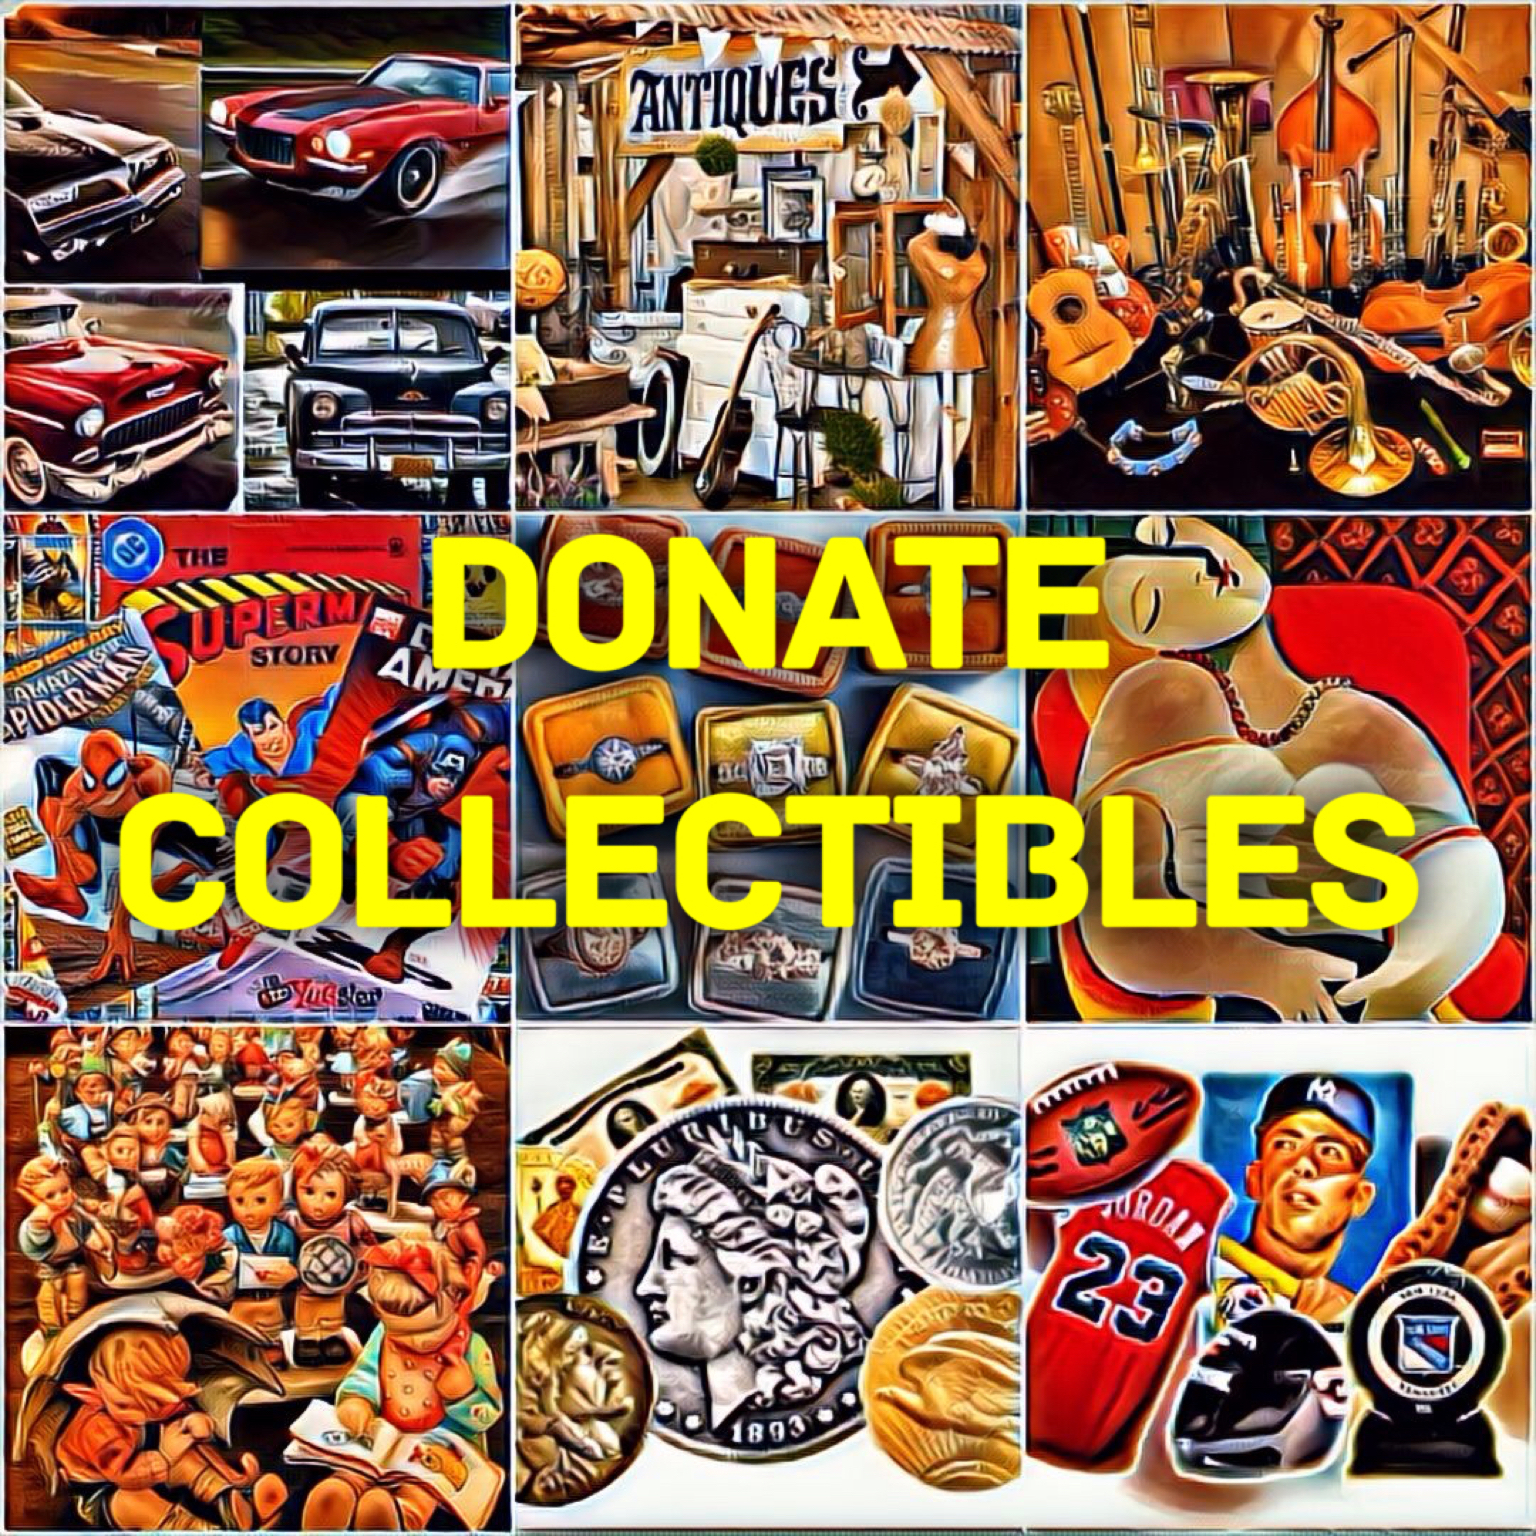 charity-donations-tax-deduction-donate-to-collectibles-with-causes